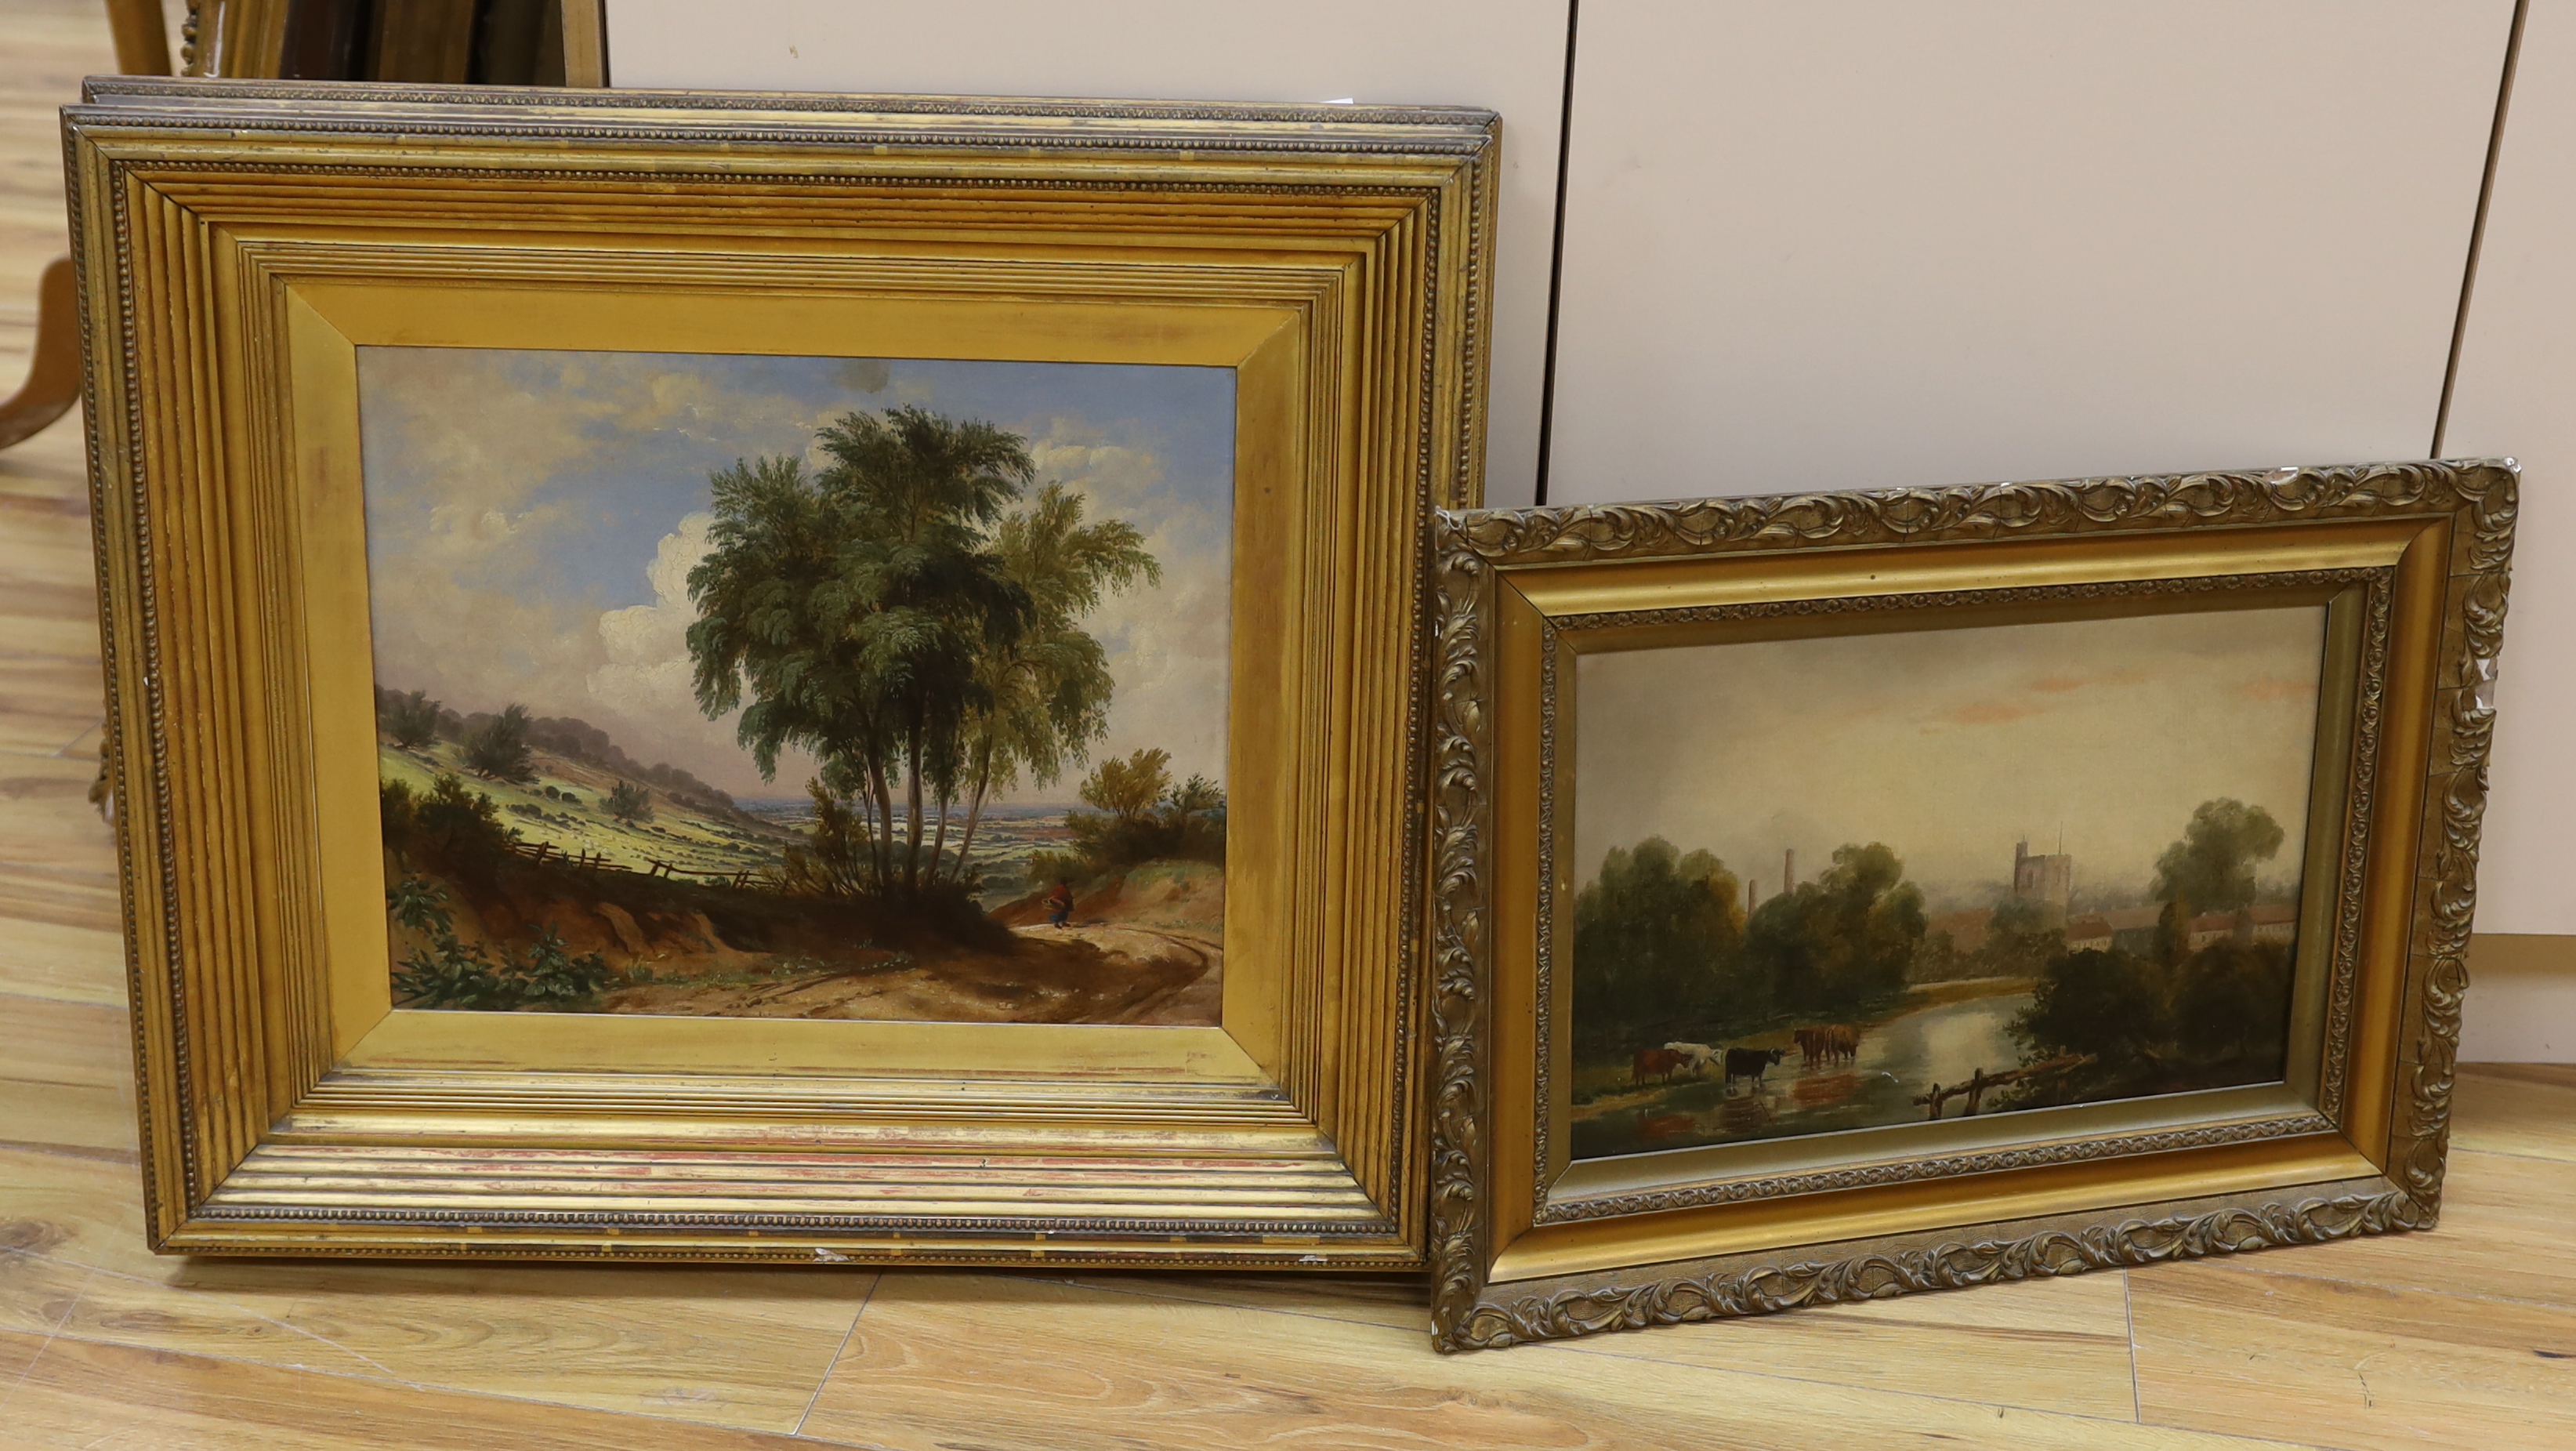 Two late 19th / early 20th century oils on canvas, Figure on a pathway and cattle beside a stream, each unsigned, largest 37 x 46cm, ornate gilt framed                                                                     